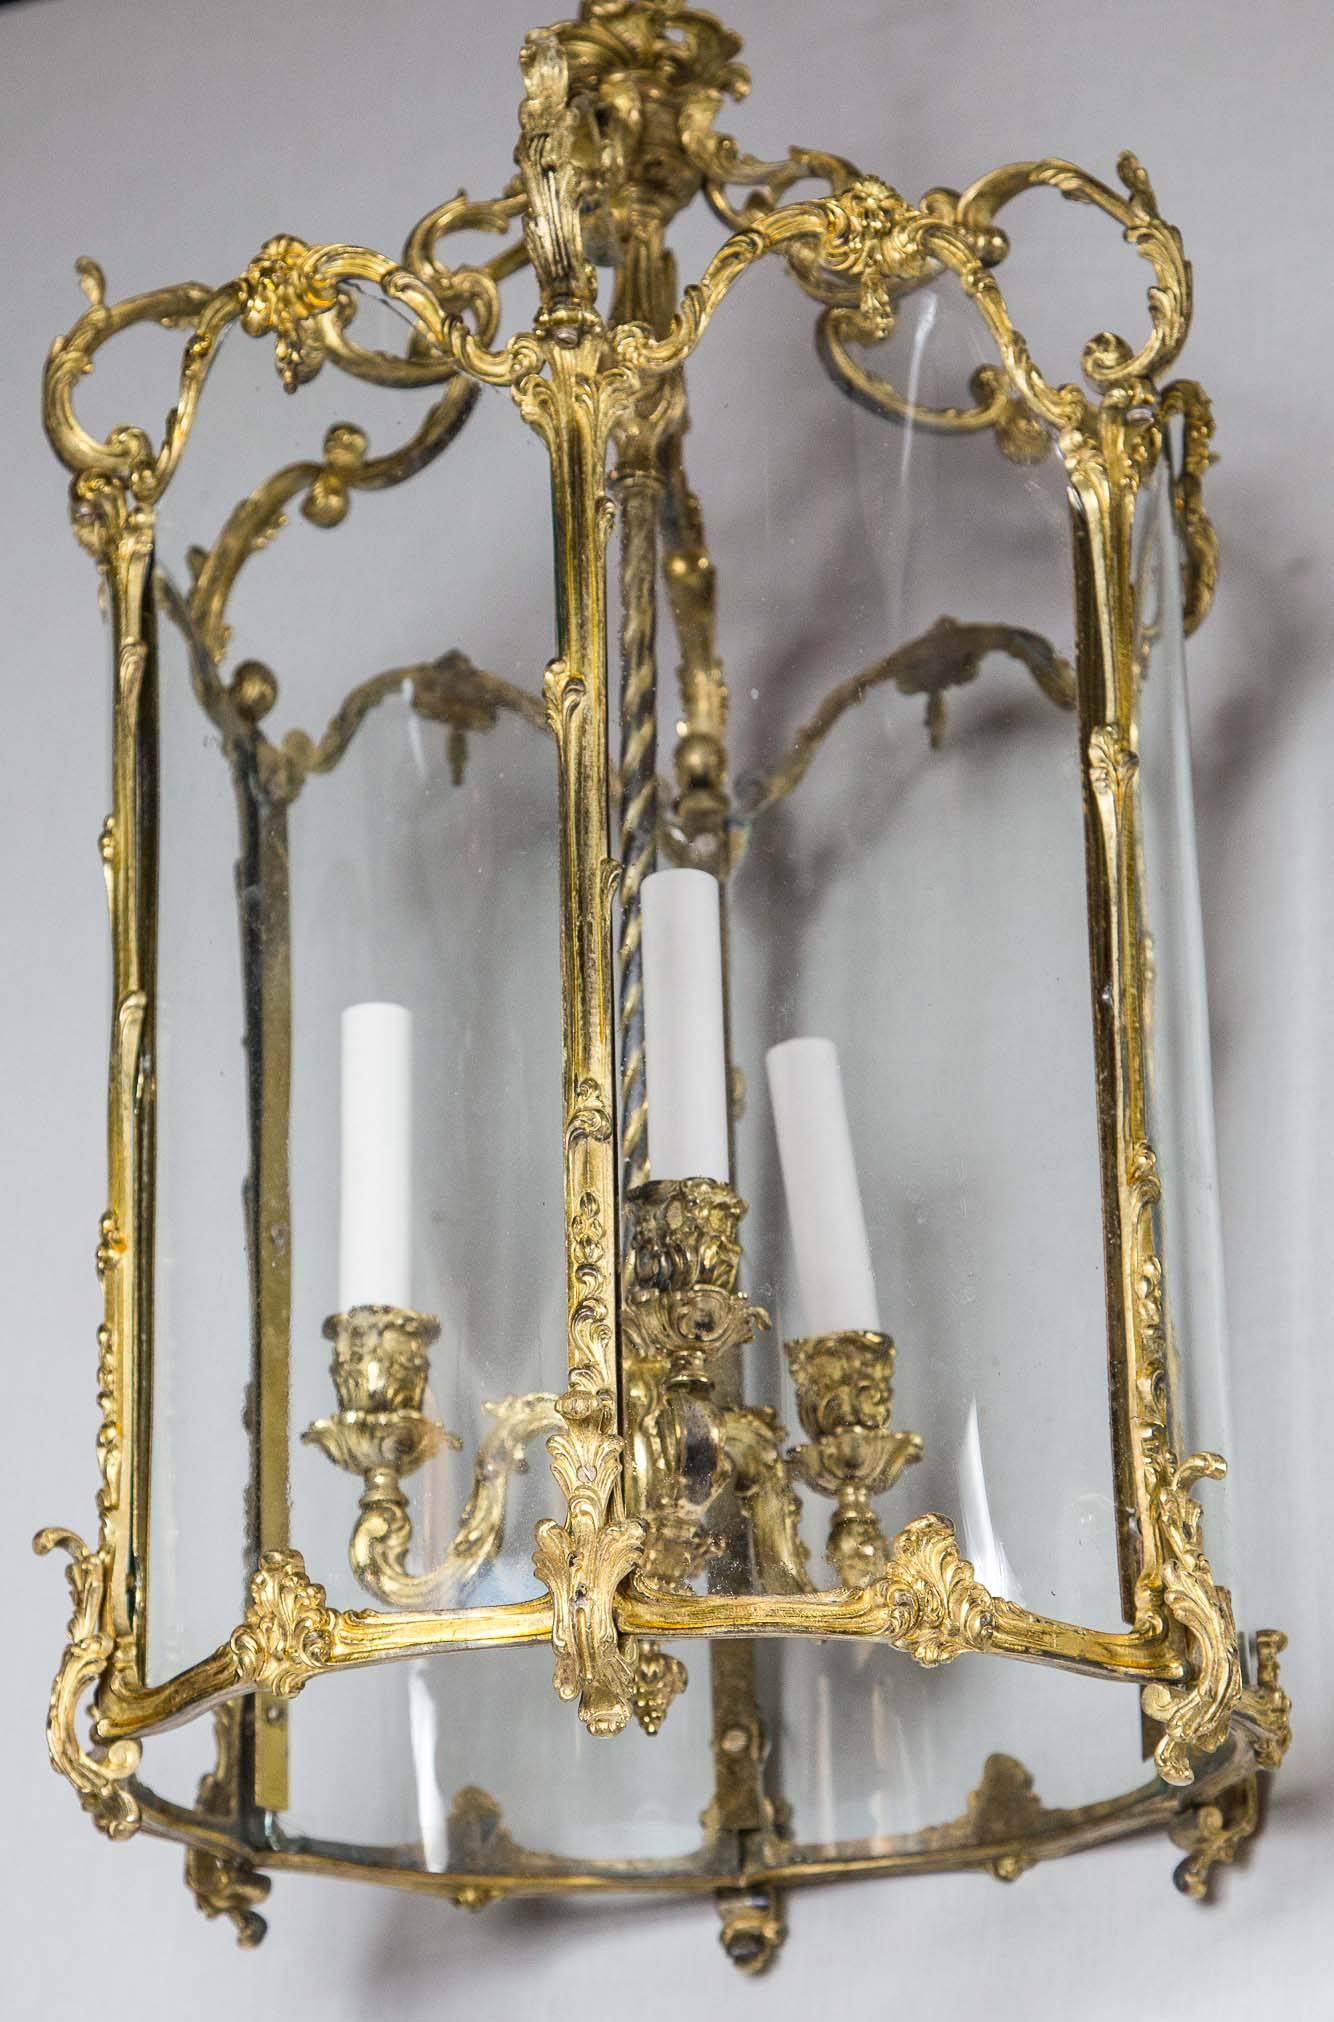 Solid gilt bronze six sided cage with three suspended electrified candle cups in the Louis XV Rococco manner with foliates and scrolls. Six glass panels. The height of 26 inches does not include any chain.